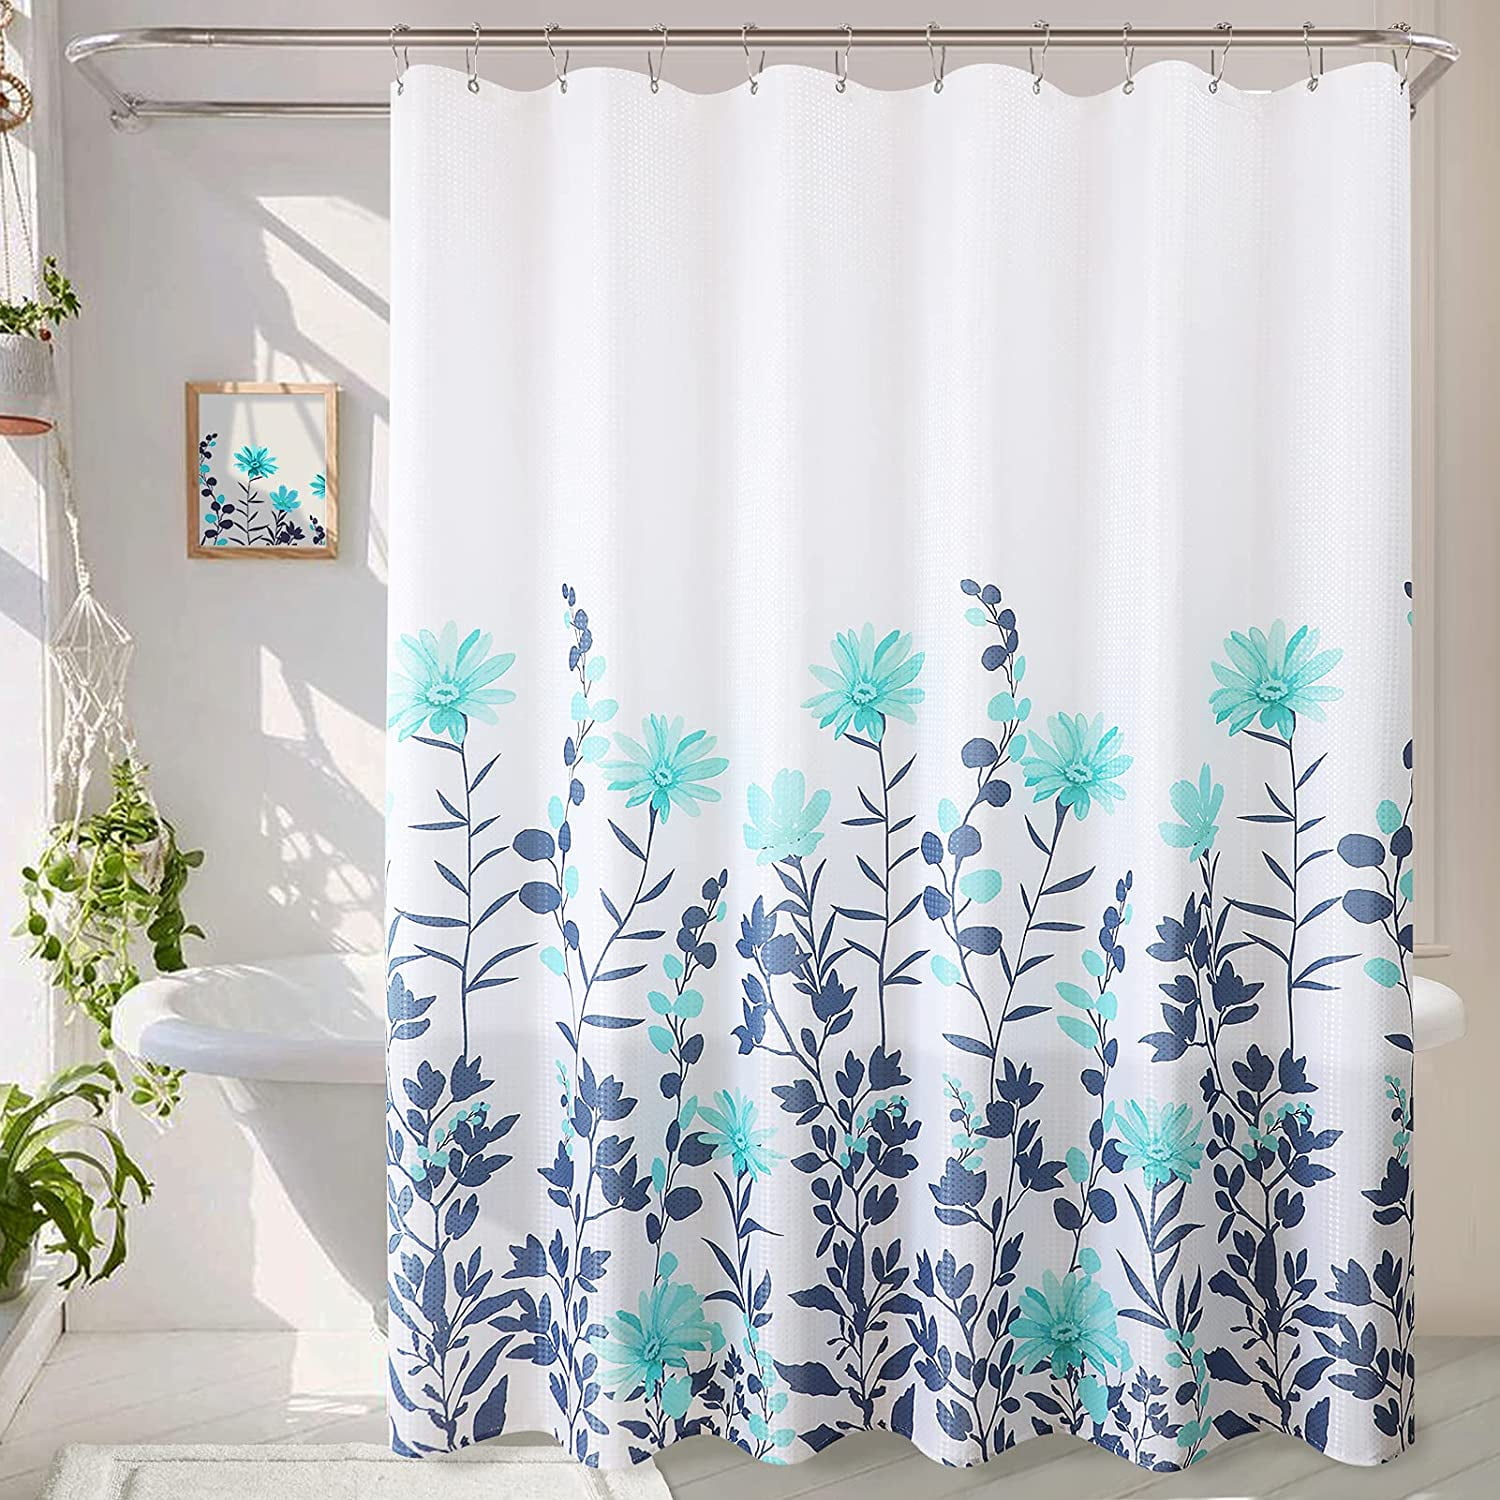 Floral Teal Shower Curtain Sets with 12 Hooks Shower Curtain Fabric Shower  Curtain Leaf Colorful Shower Curtain Bathroom Water Repellent Decorative  Blue Turquoise Copen Blue 72x72 Inch 